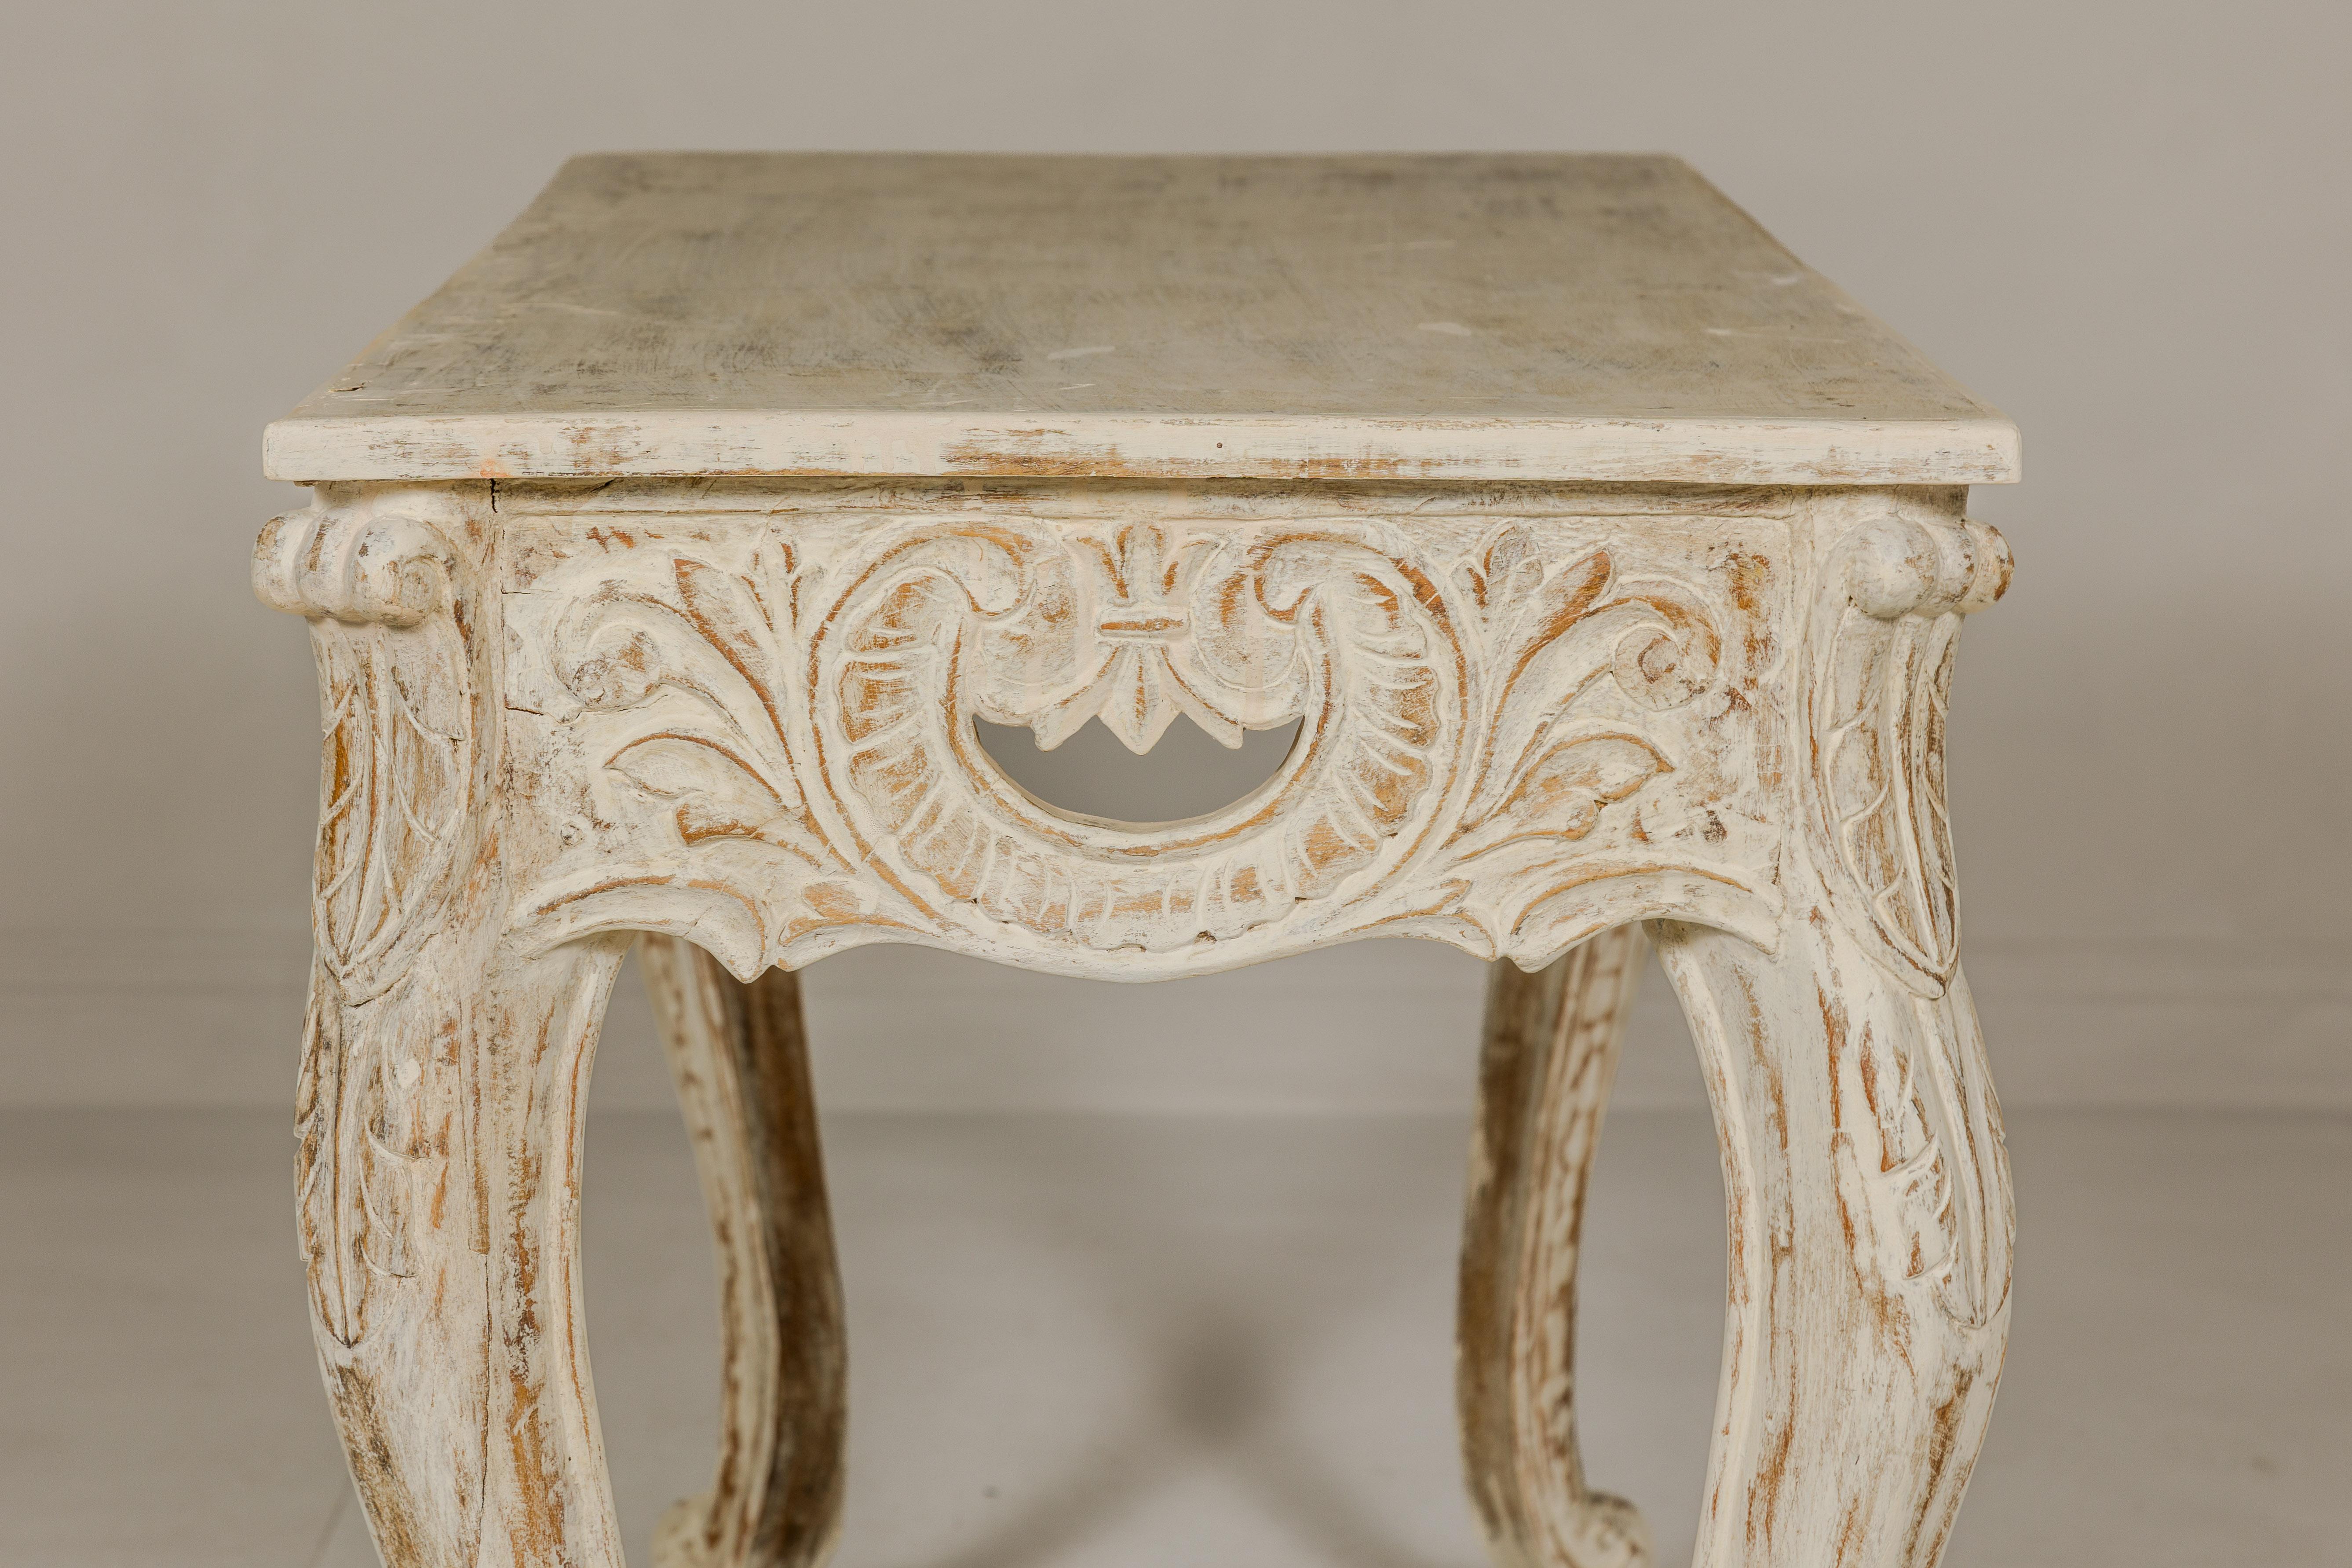 Rococo Style Painted Console Table with Carved Apron and Distressed Finish For Sale 13